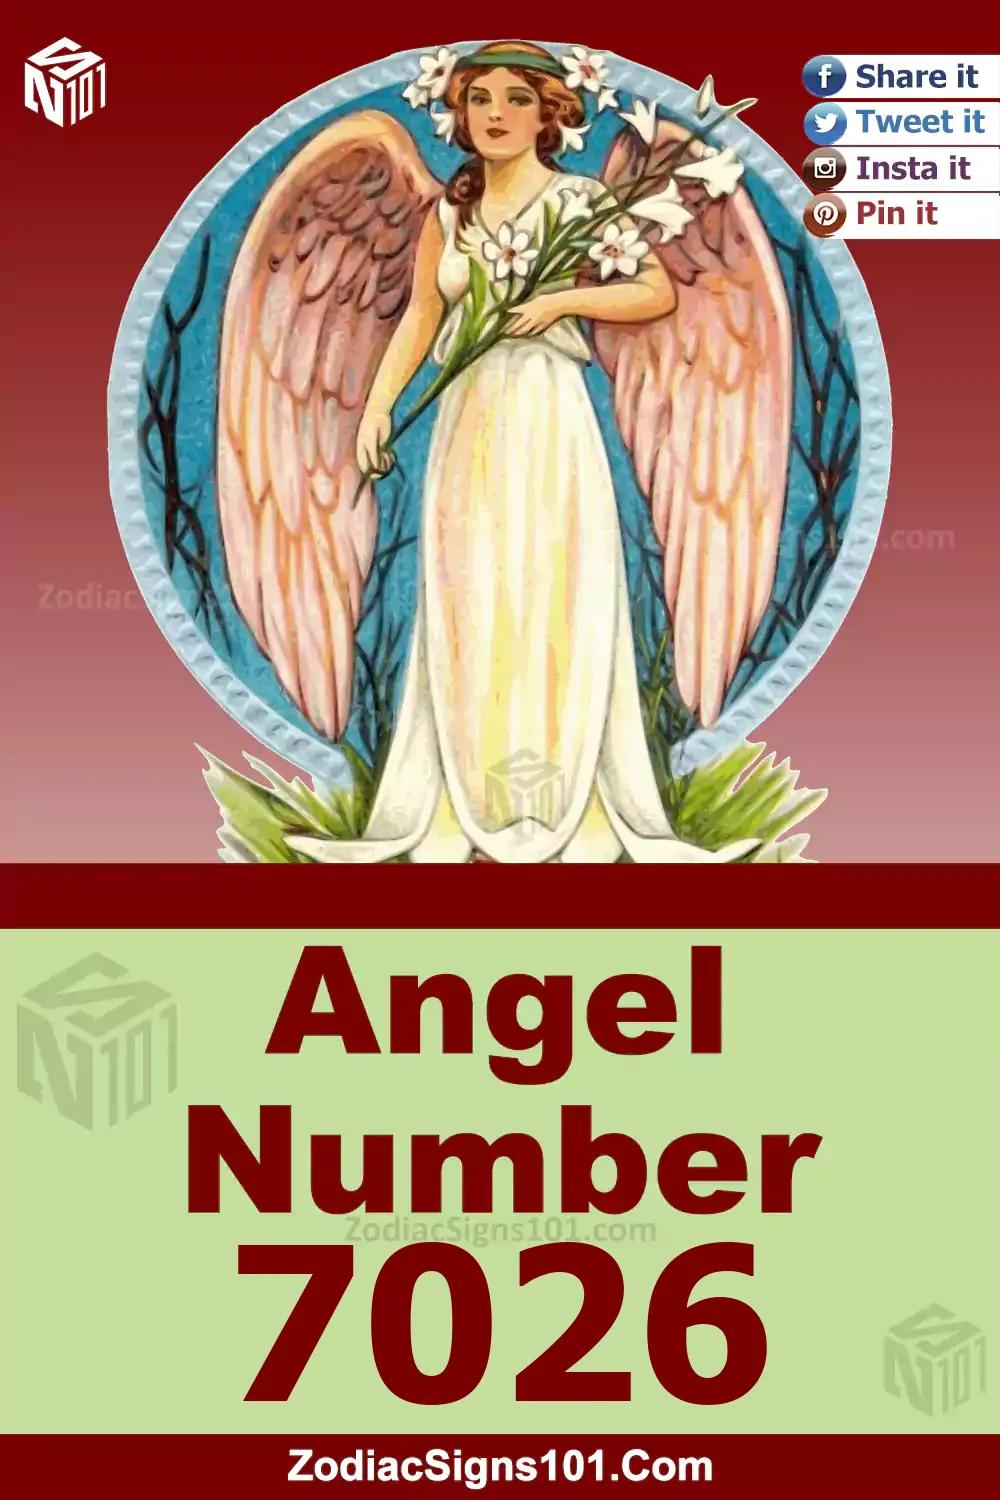 7026 Angel Number Meaning